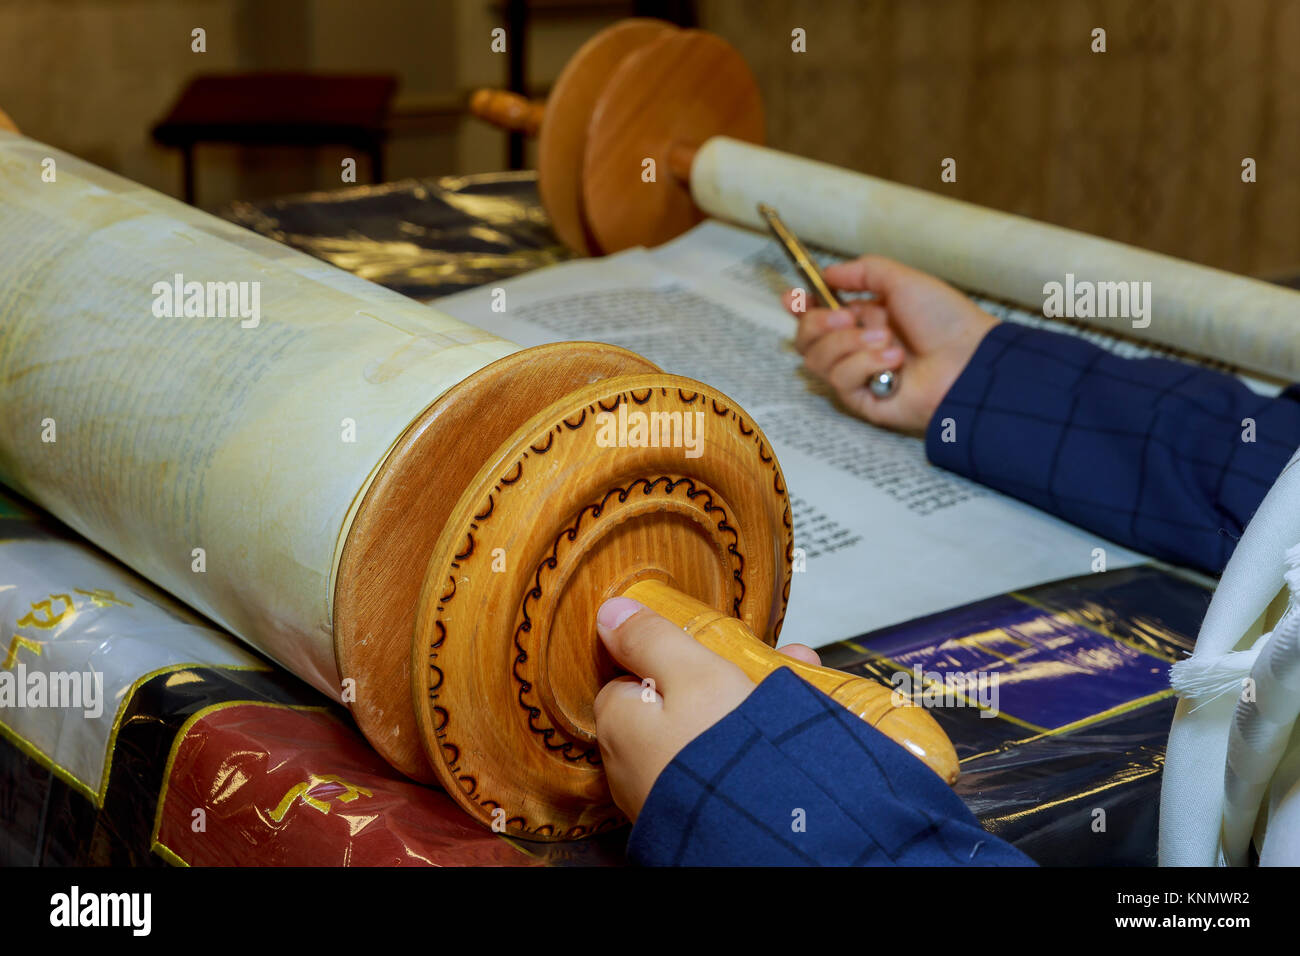 Reading a Torah scroll during a bar mitzvah ceremony with a traditional yad pointing towards the text on the parchment. Stock Photo